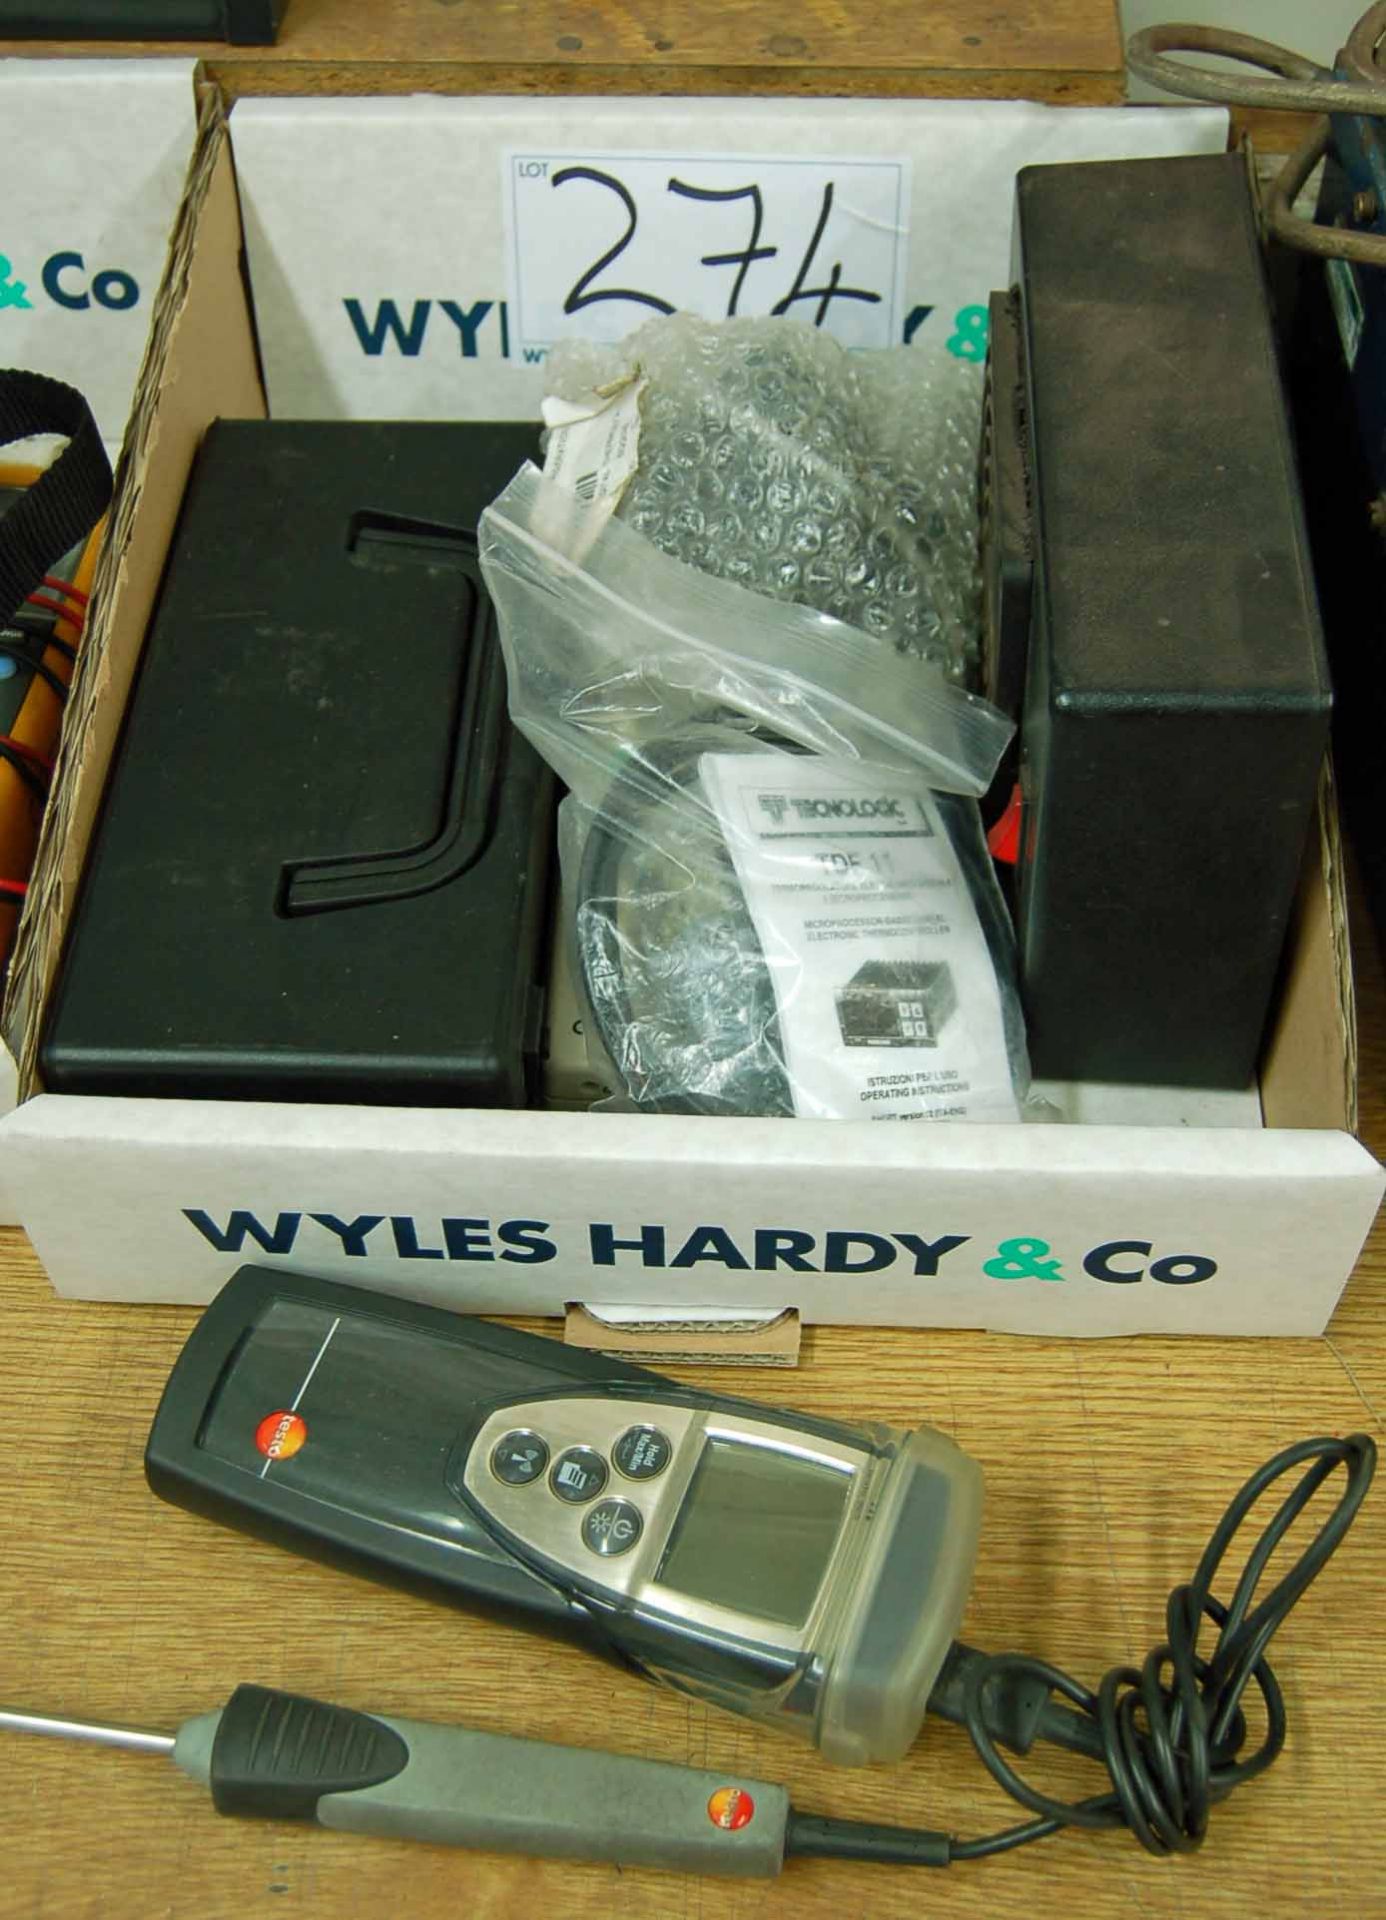 A Quantity of Hand Held Electrical Test Meters (As Photographed)